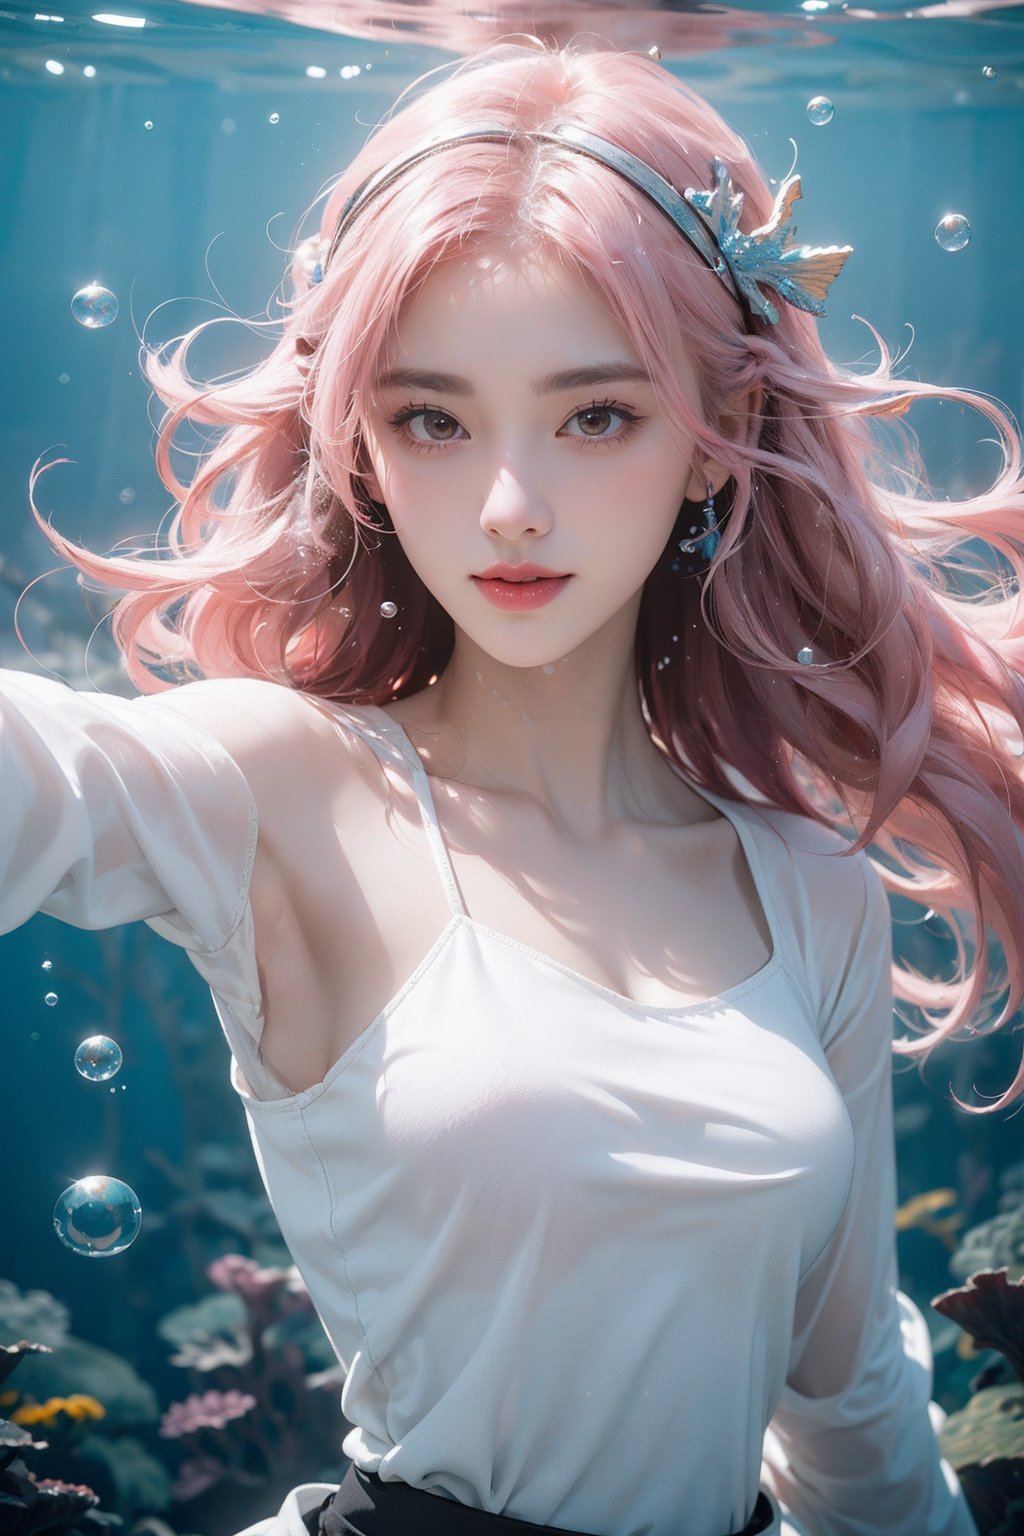  In the photo, the girl is floating underwater, smiling at the camera, grin, surrounded by foam, Body glow, Arms outstretched,

(wide Angle, Low Angle, Underwater, bubble, foam, Super long pink hair floating in the water, upper body:1.5),

white top, pleated skirt, Small black leather shoes and White cotton socks, lean forward, long sleeves, brown eyes, mini skirt,

Water, In the pool, swimming,

HDR, Vibrant colors, surreal photography, highly detailed, masterpiece, ultra high res,
high contrast, mysterious, cinematic, fantasy, bright natural light,